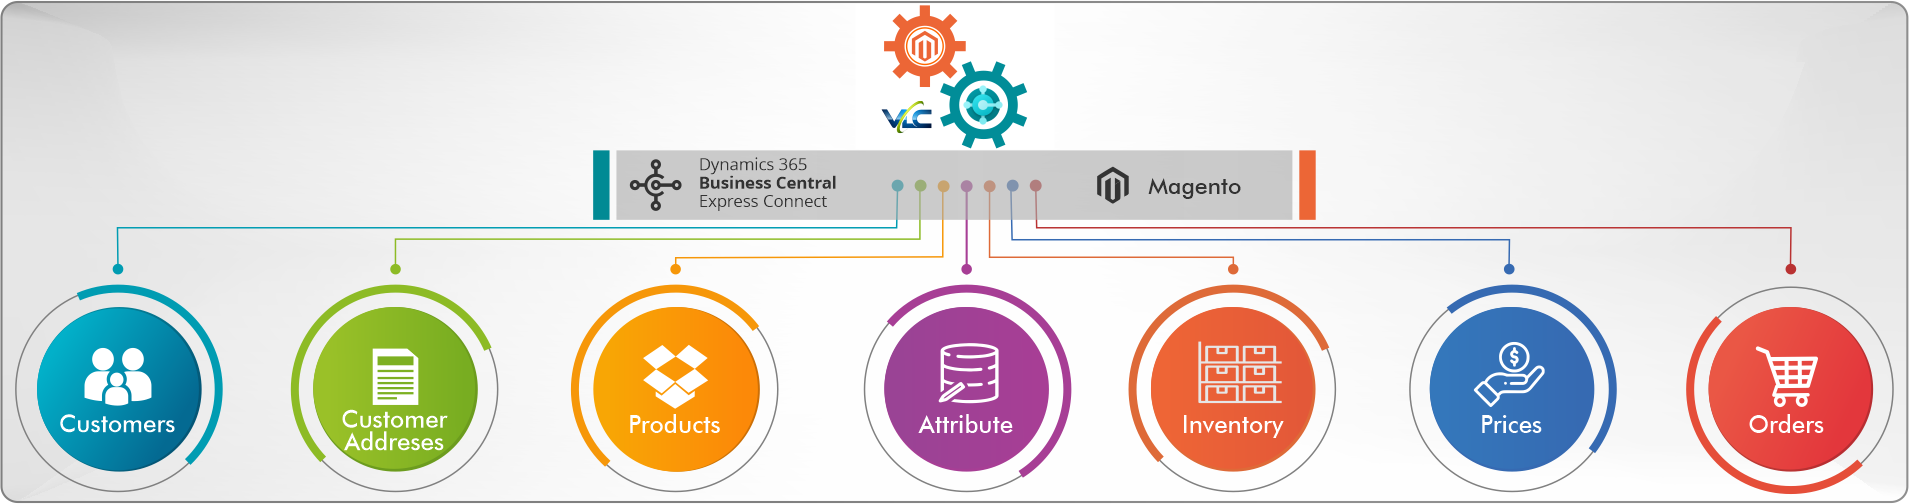 Magento Connector for Dynamics 365 Business Central